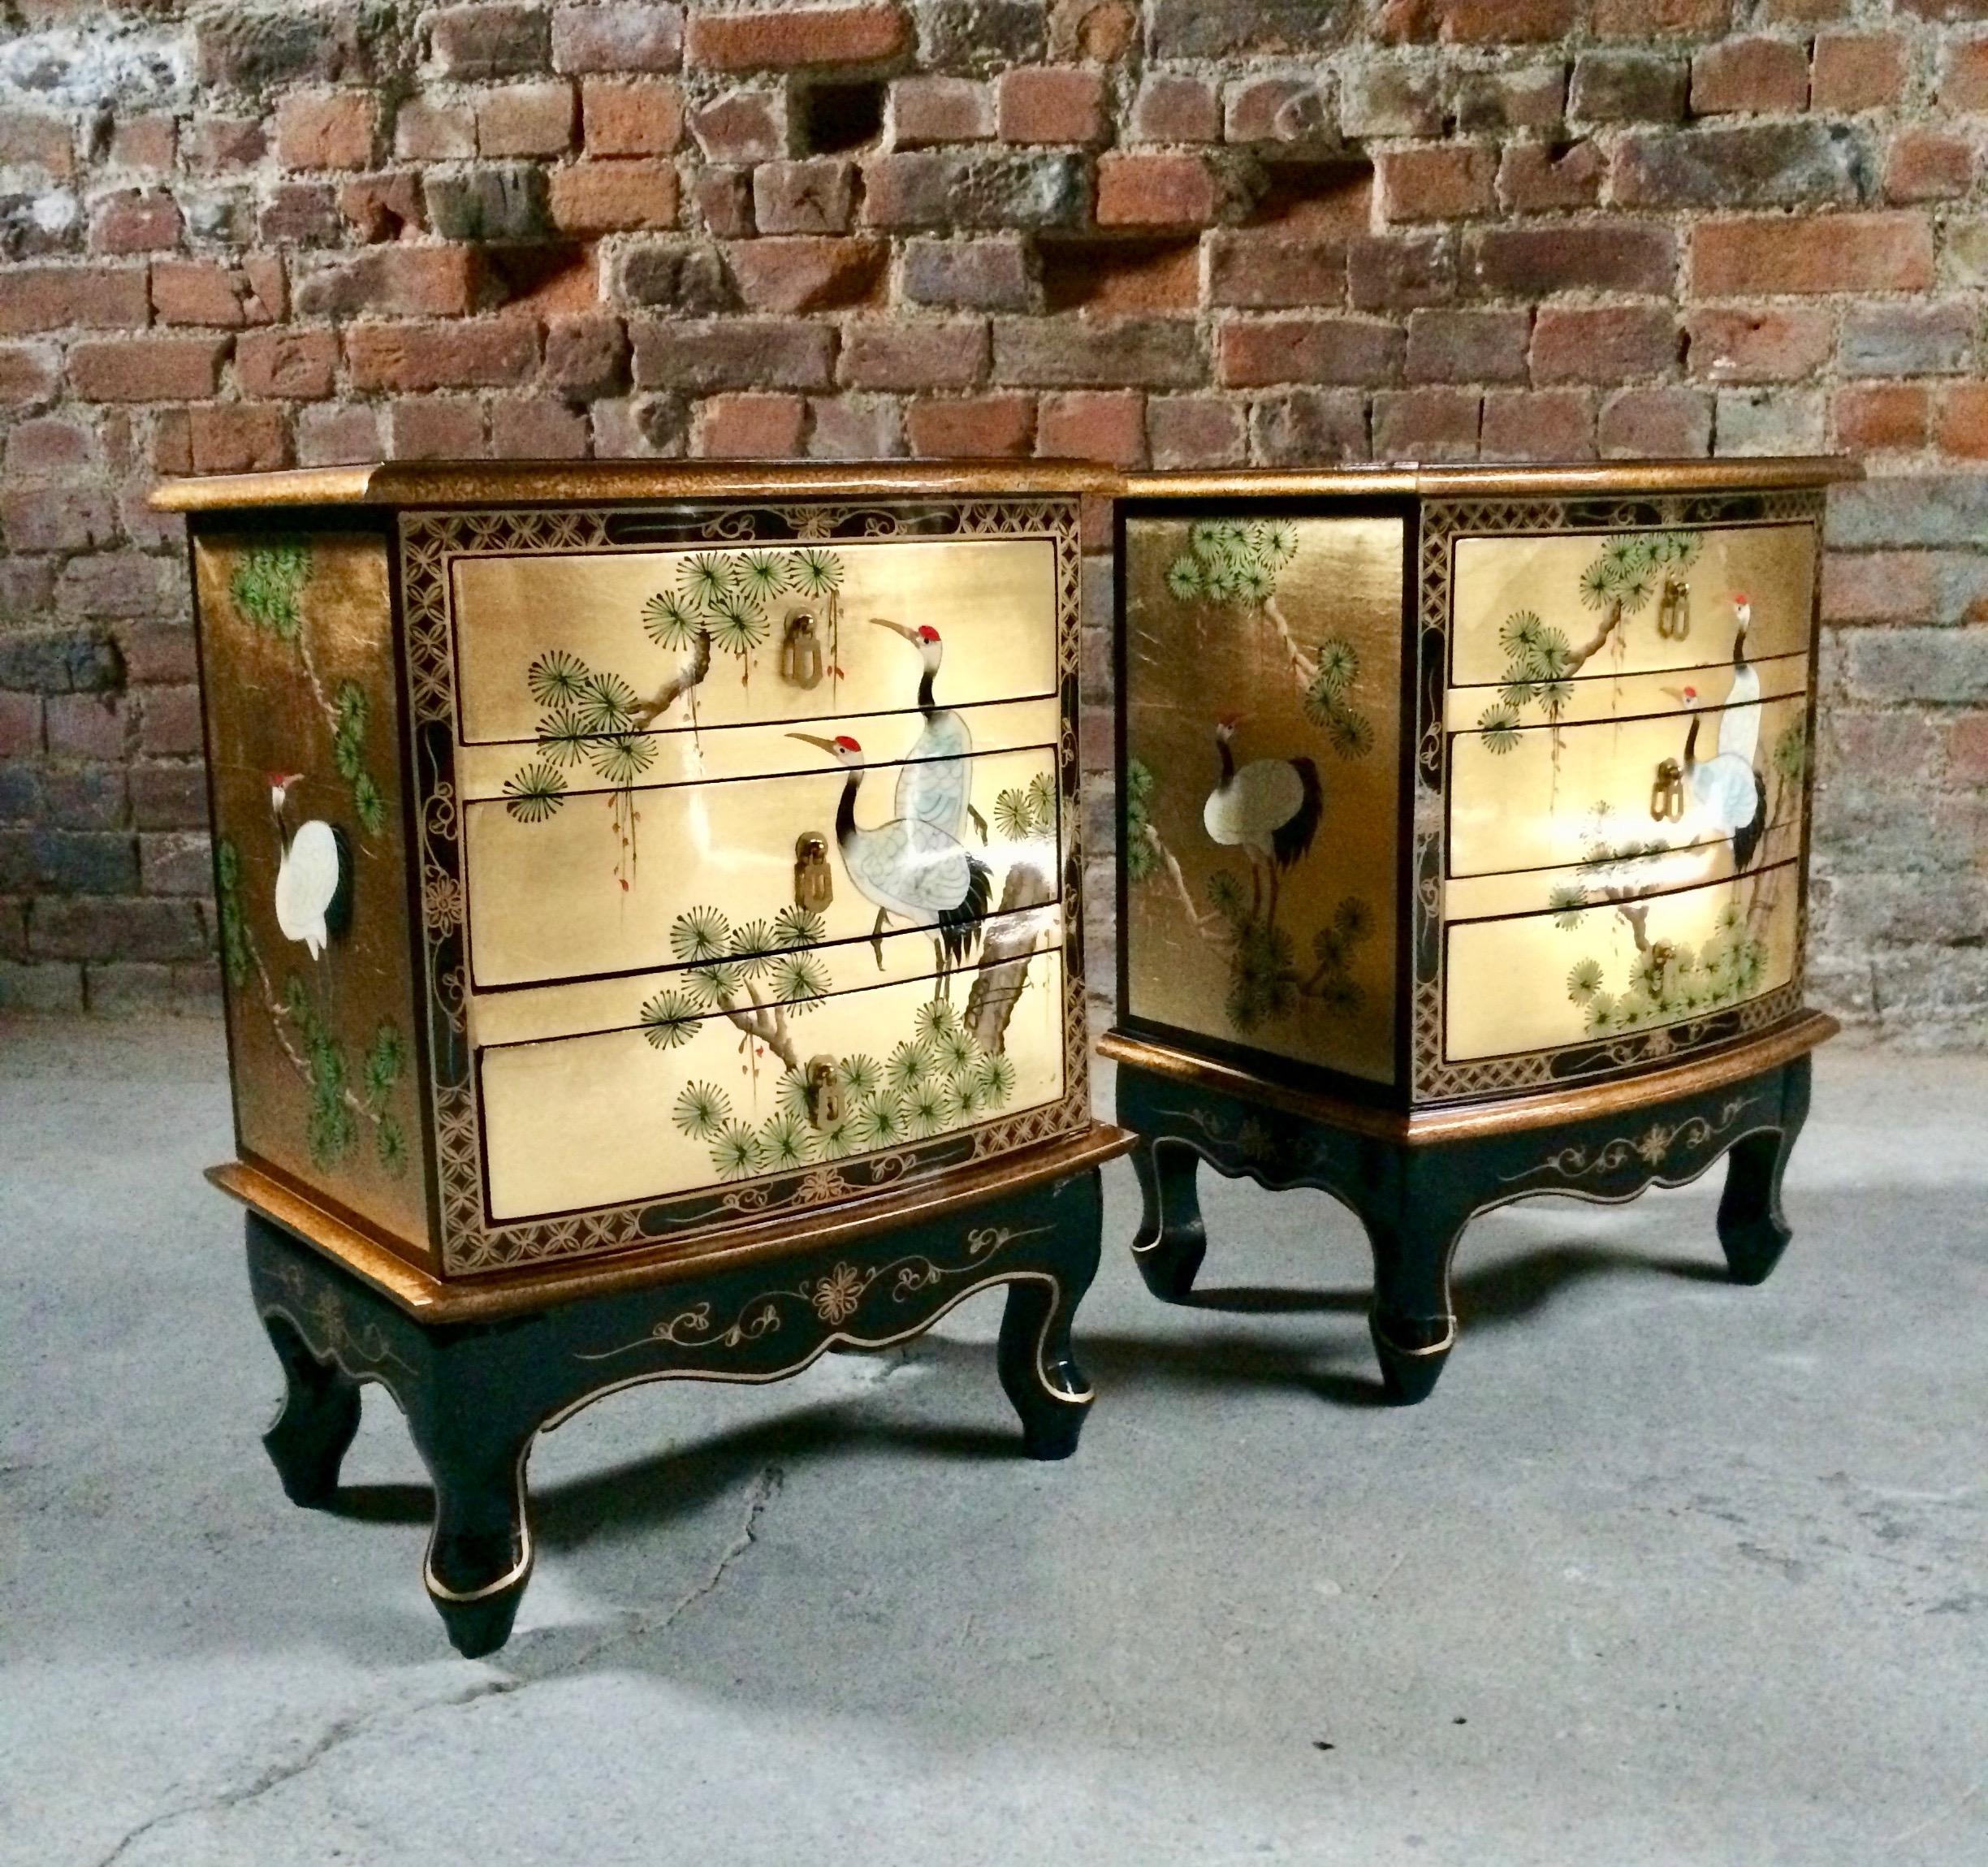 Anglo-Japanese Magnificent Gilded Japanese Bedside Cabinets Nightstands and Trunk Lacquered